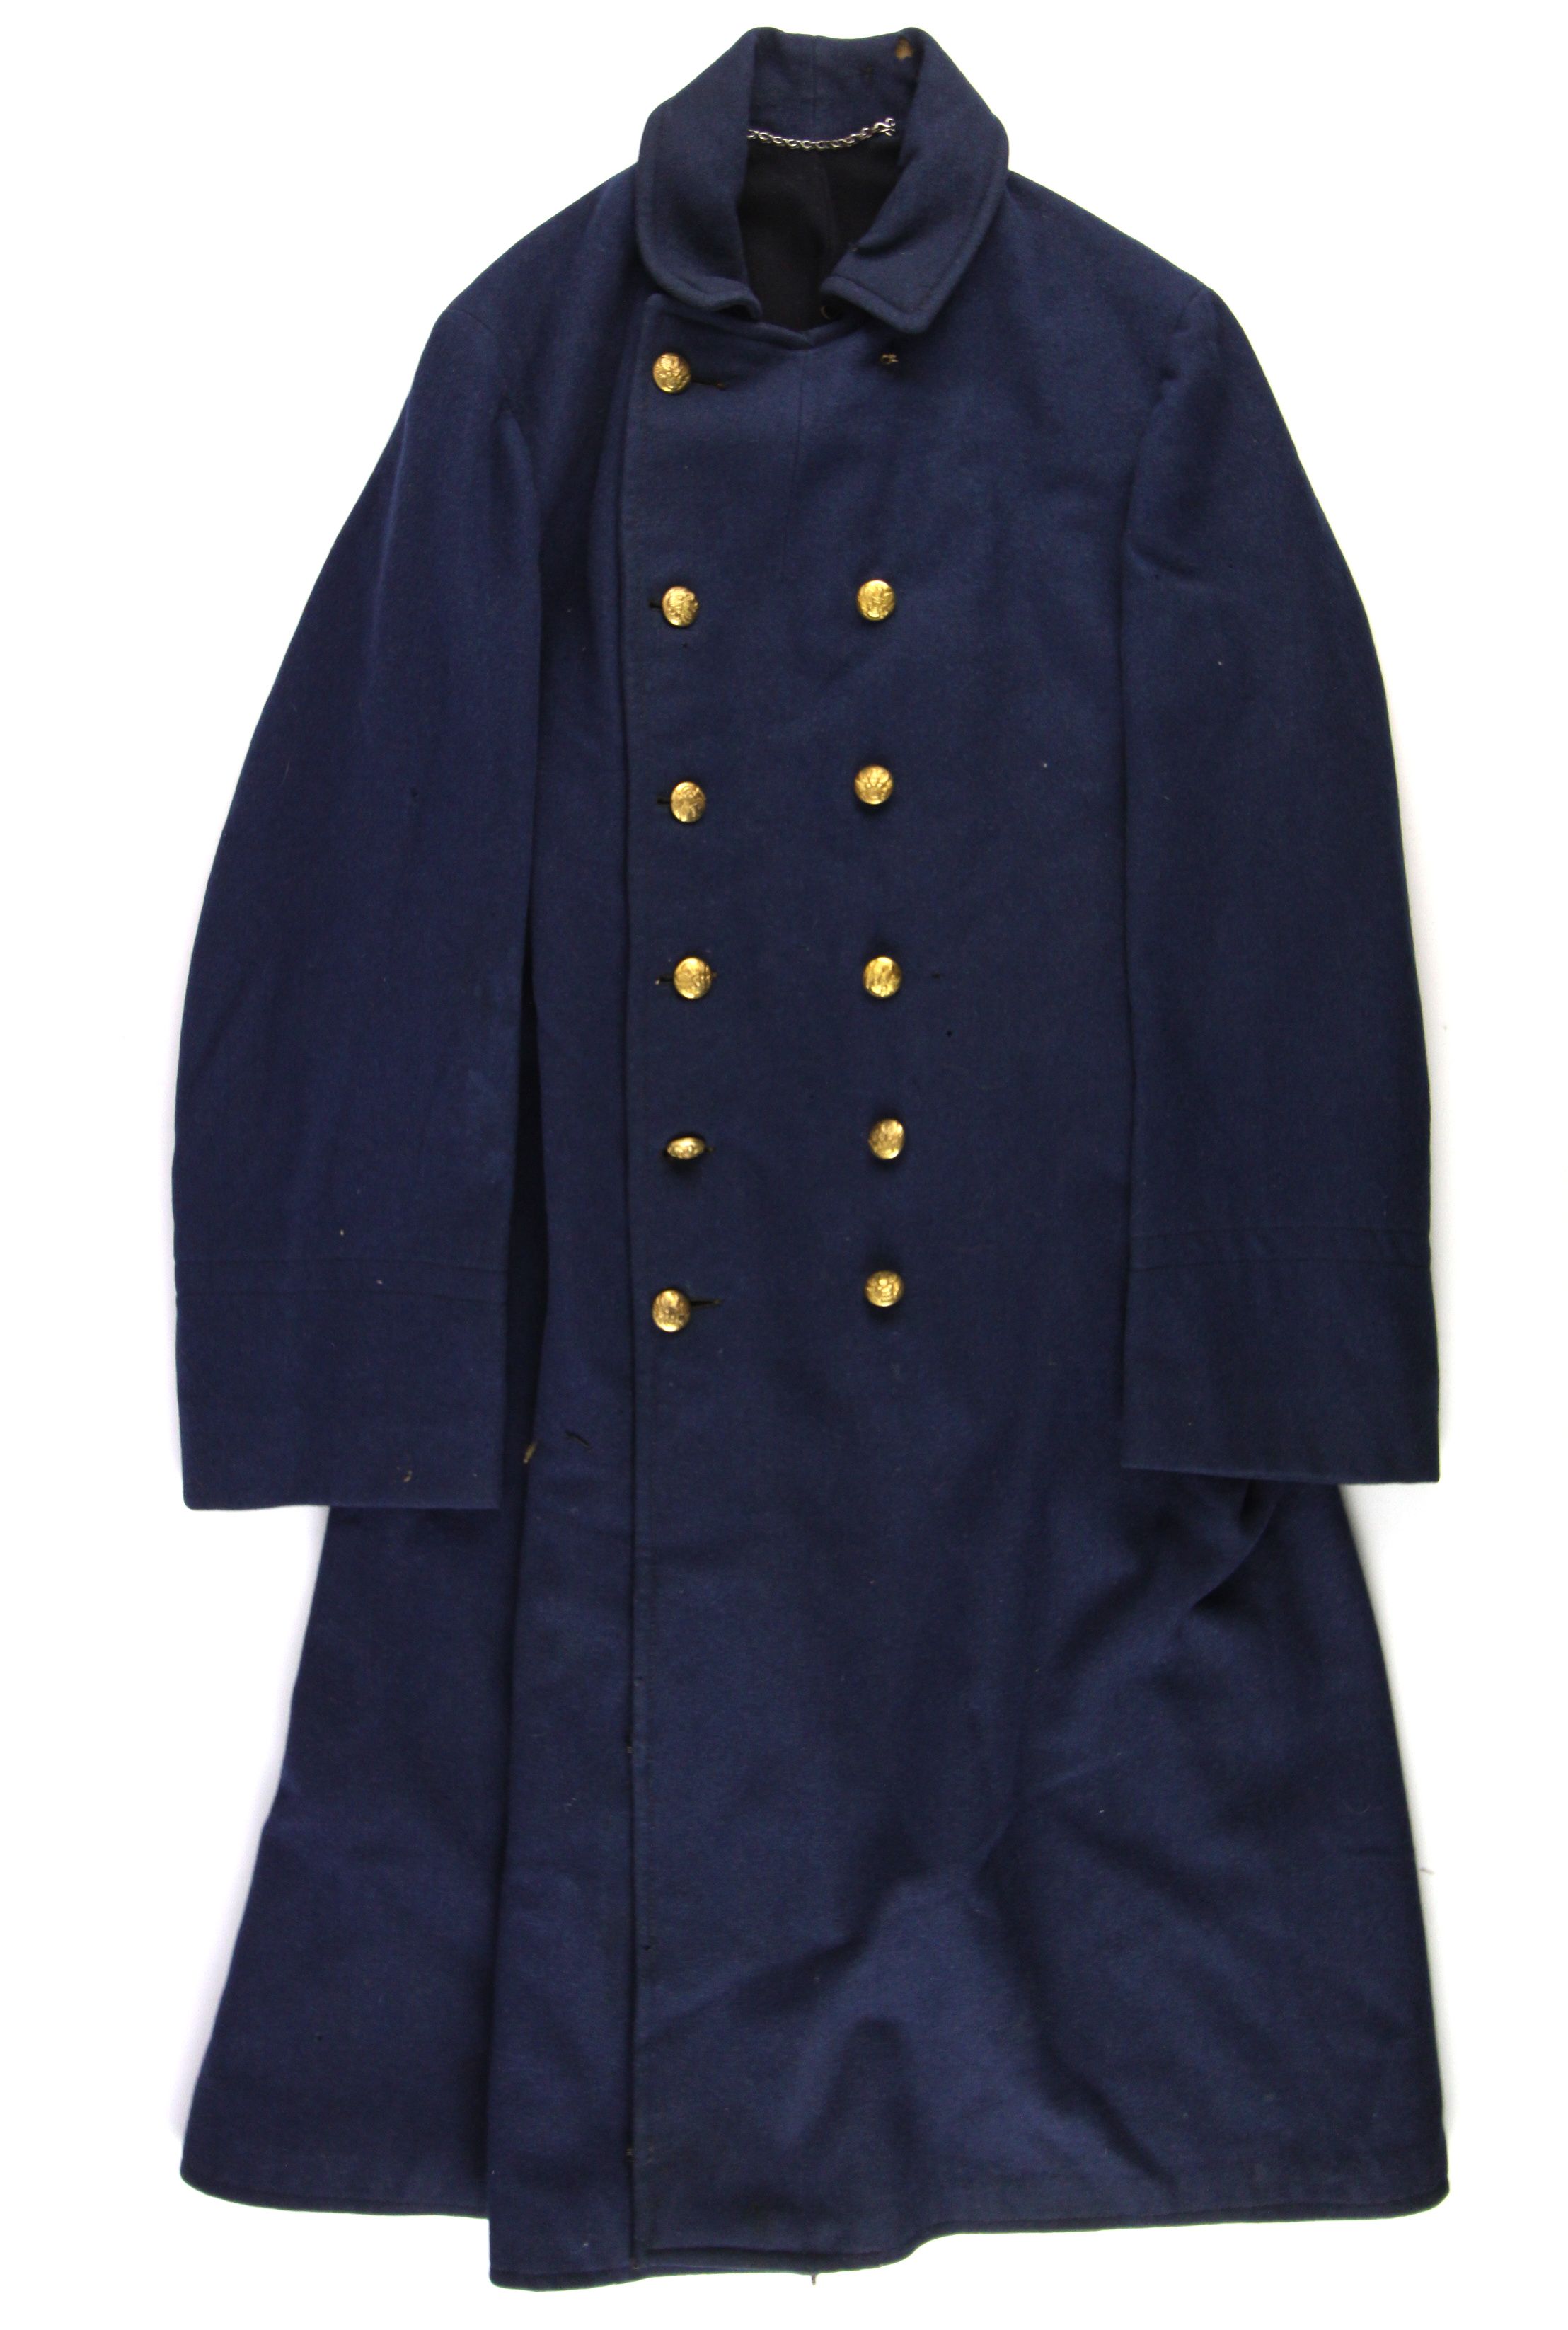 Lot Detail - 1883 United States Army Cavalry Overcoat